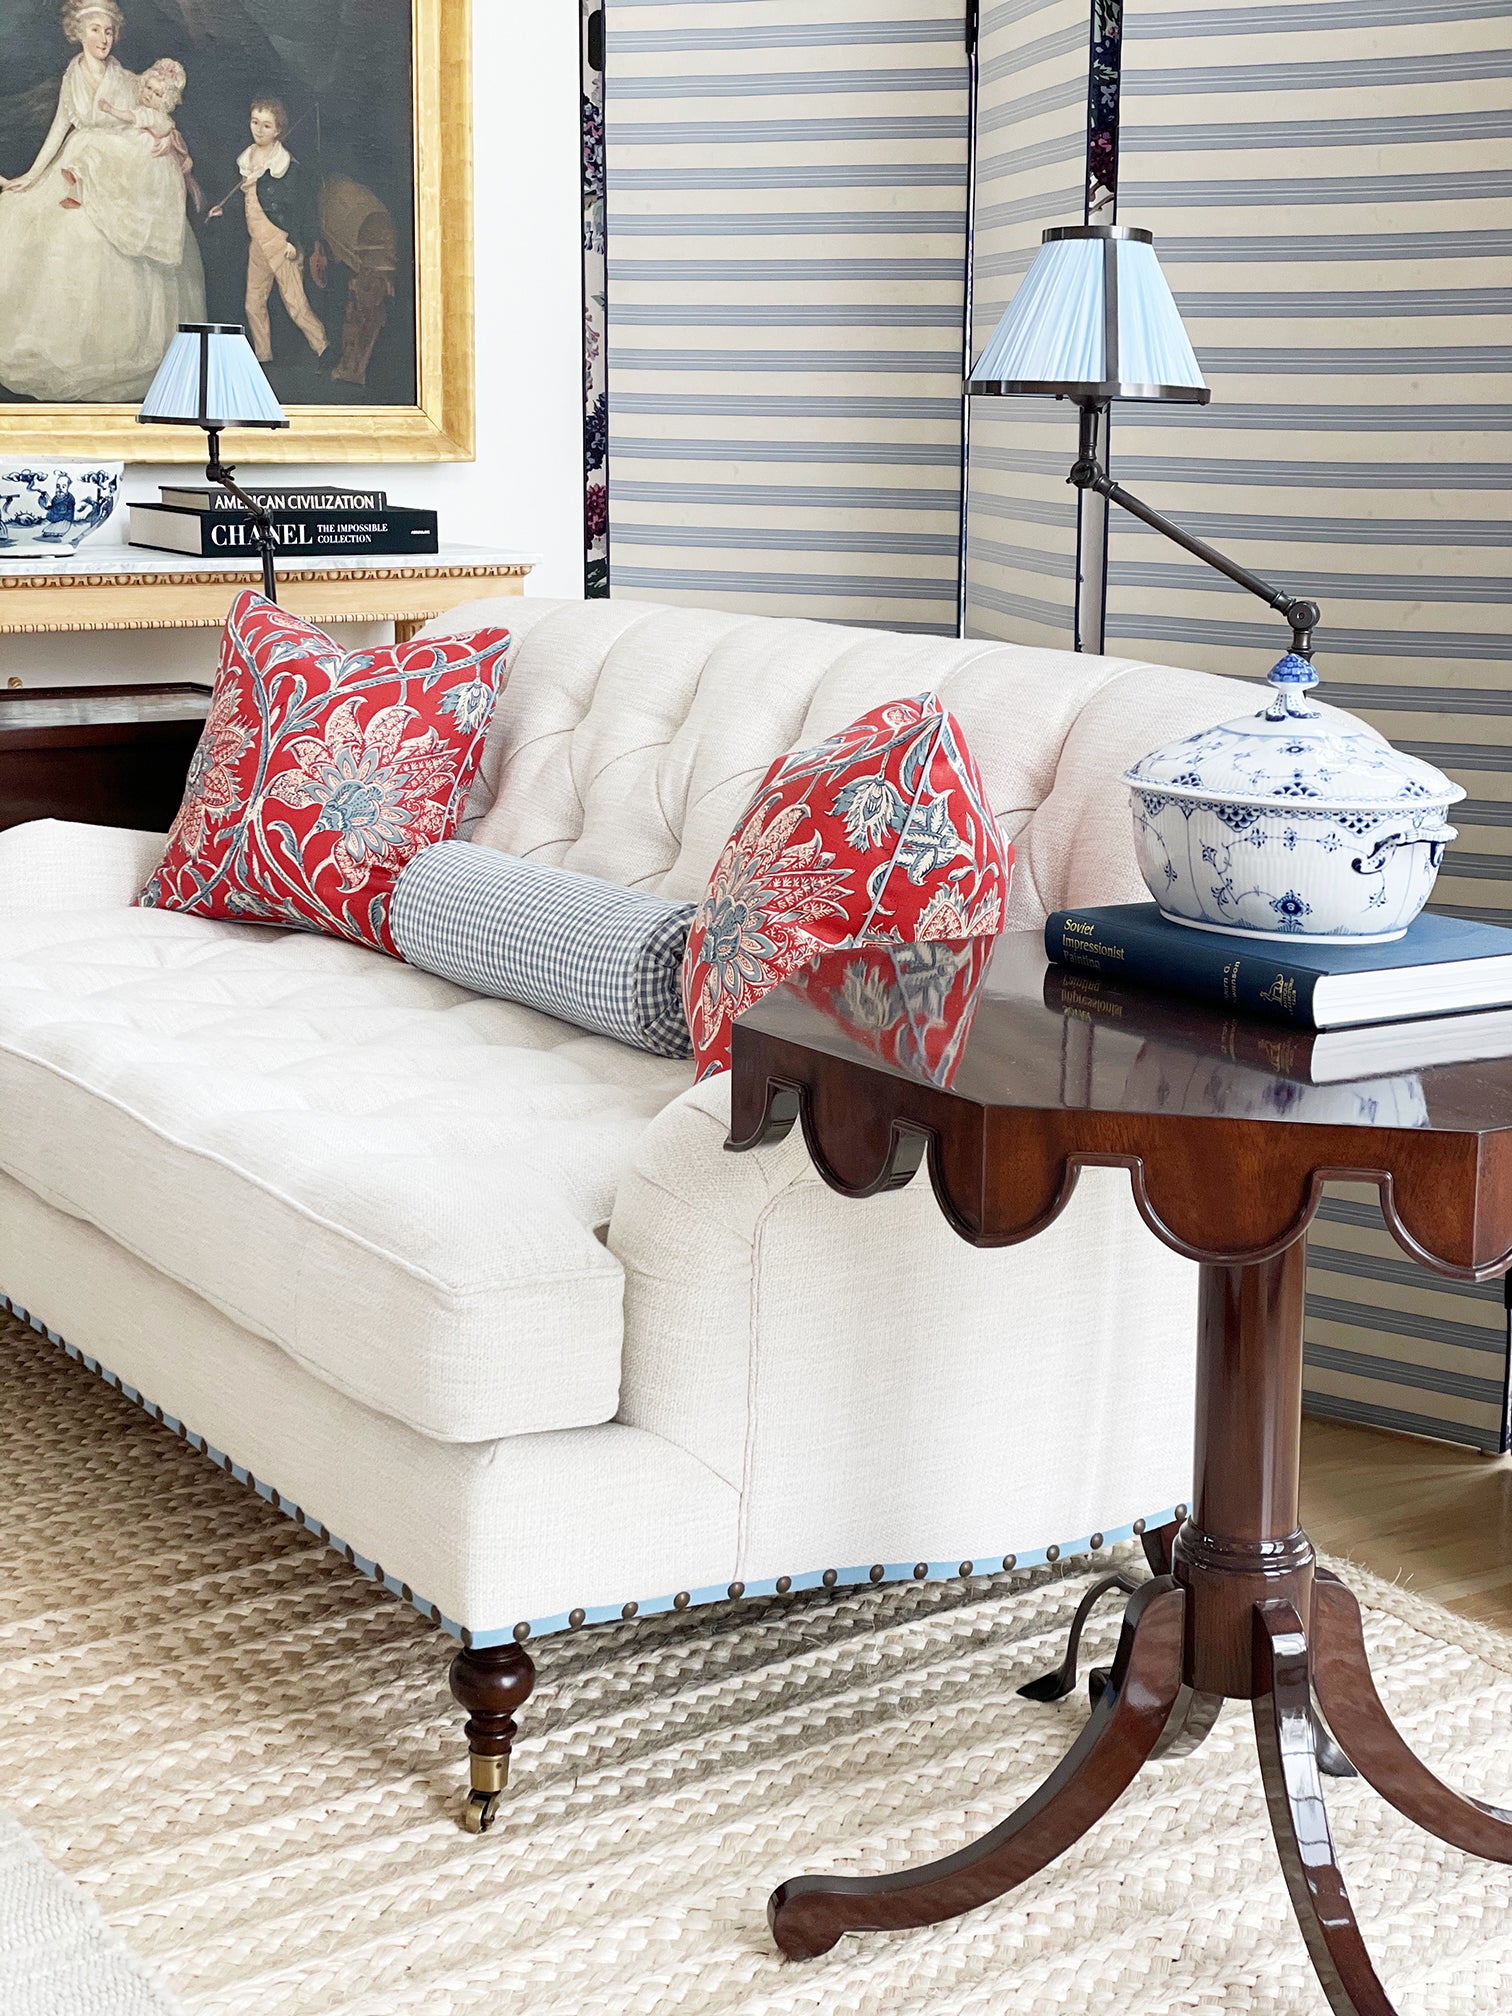 Clarke & Clarke Blue and White Check Bolster – hillary w taylor interiors